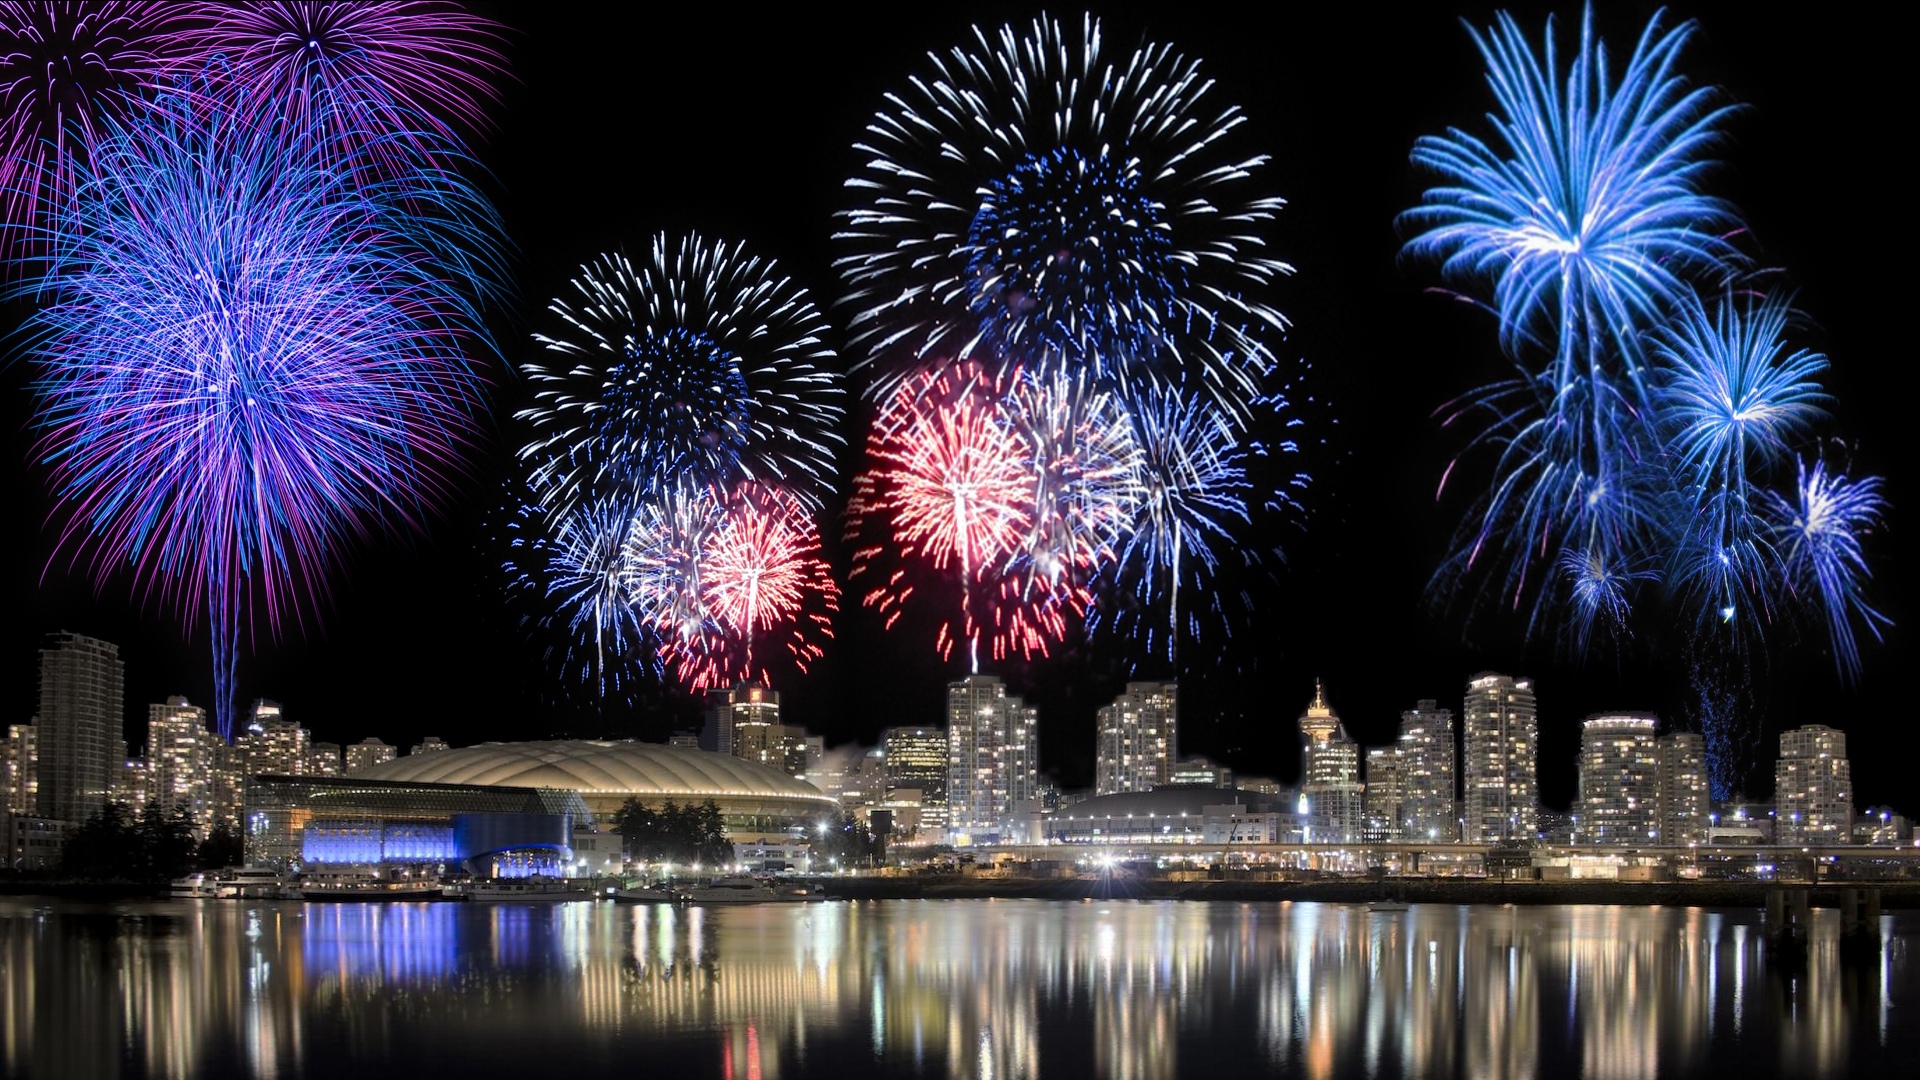 Fireworks Background Wallpapers | WIN10 THEMES